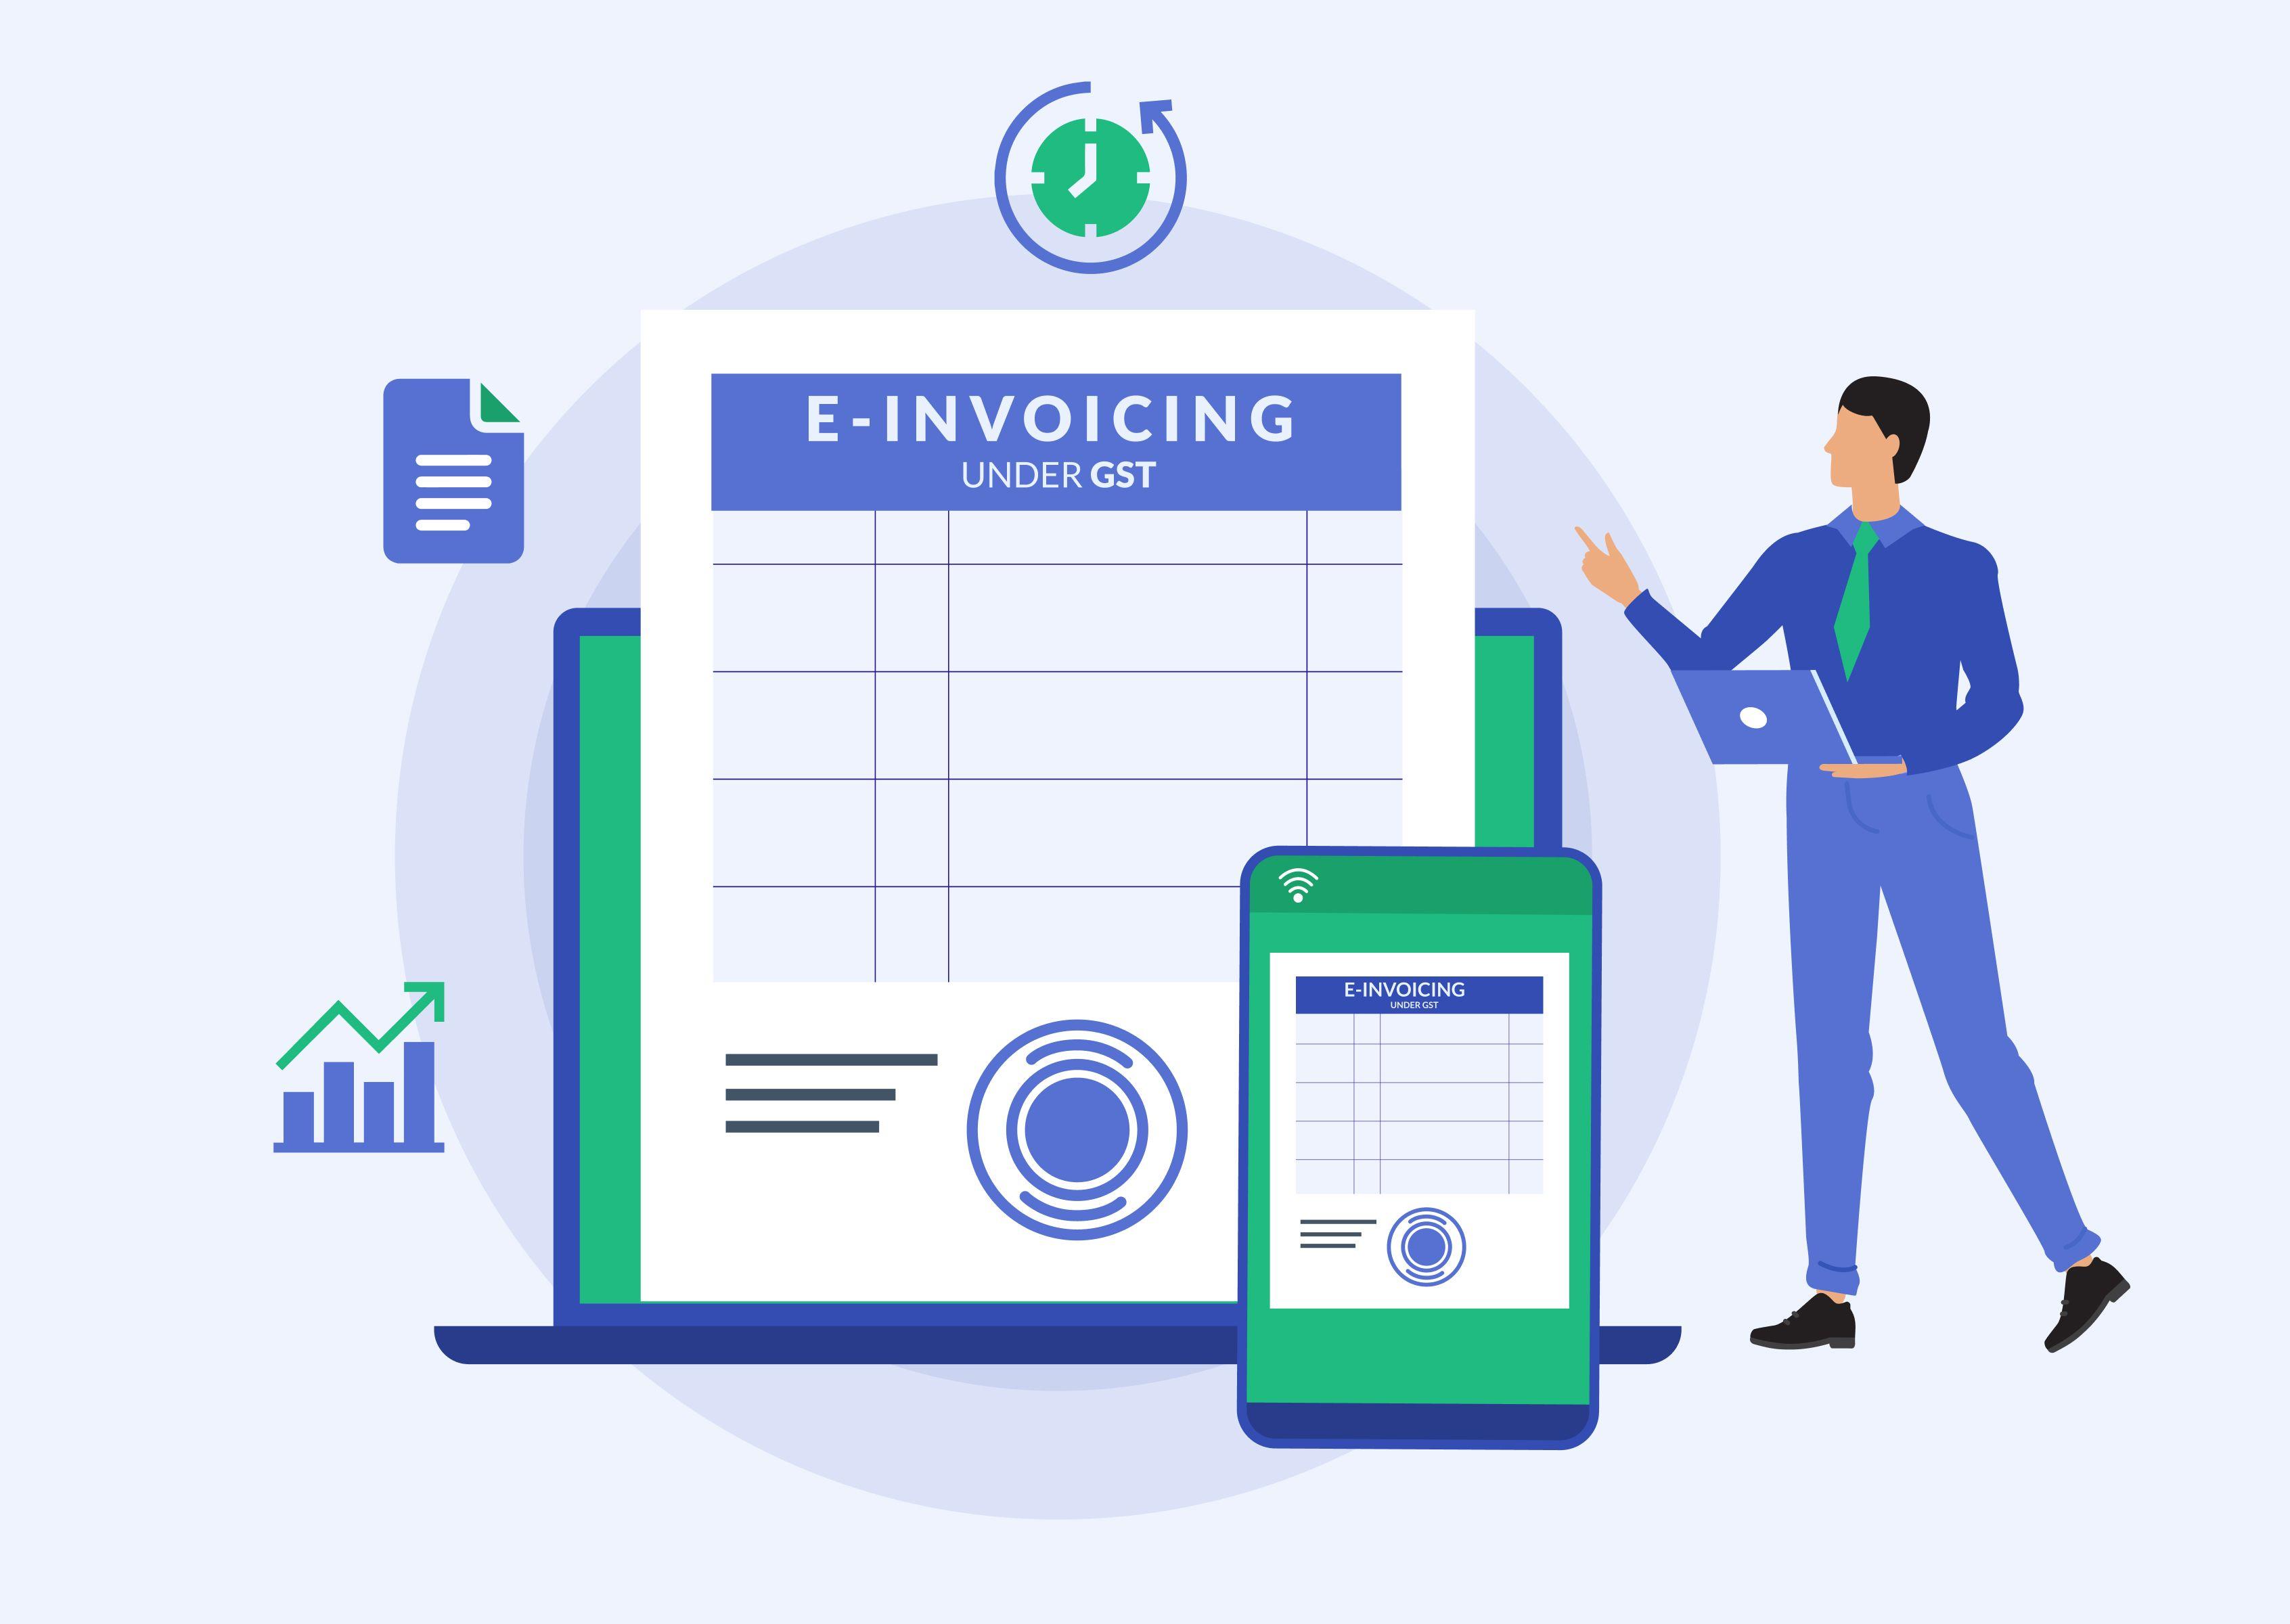 What is e-invoicing under GST and who needs to generate it?